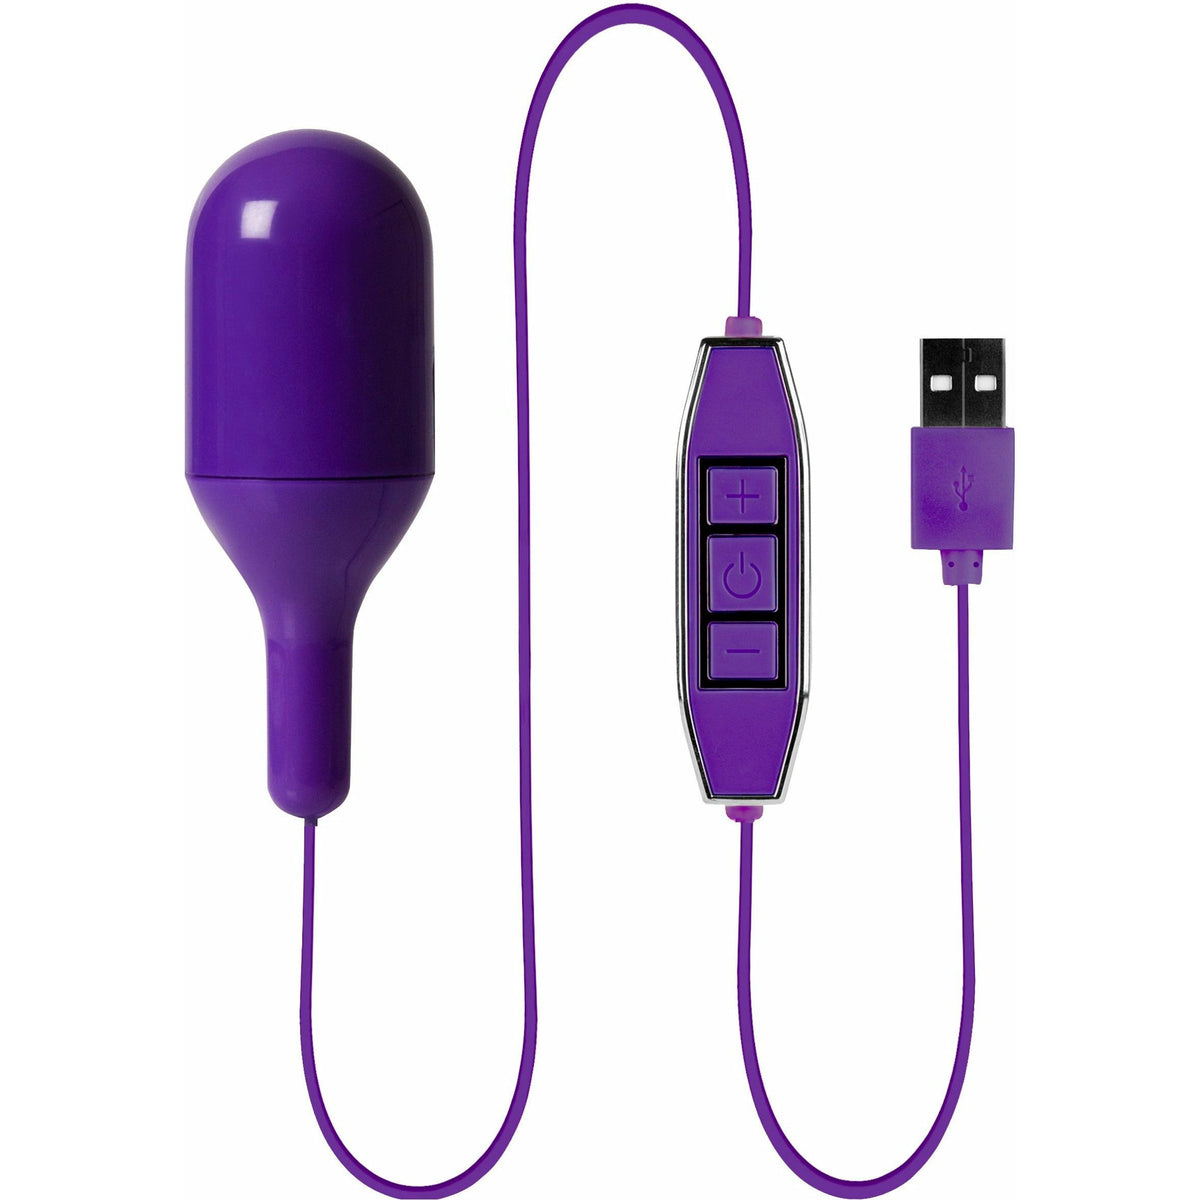 NMC Handy Perky - Bullet Vibrator with Remote - Rechargeable - Purple